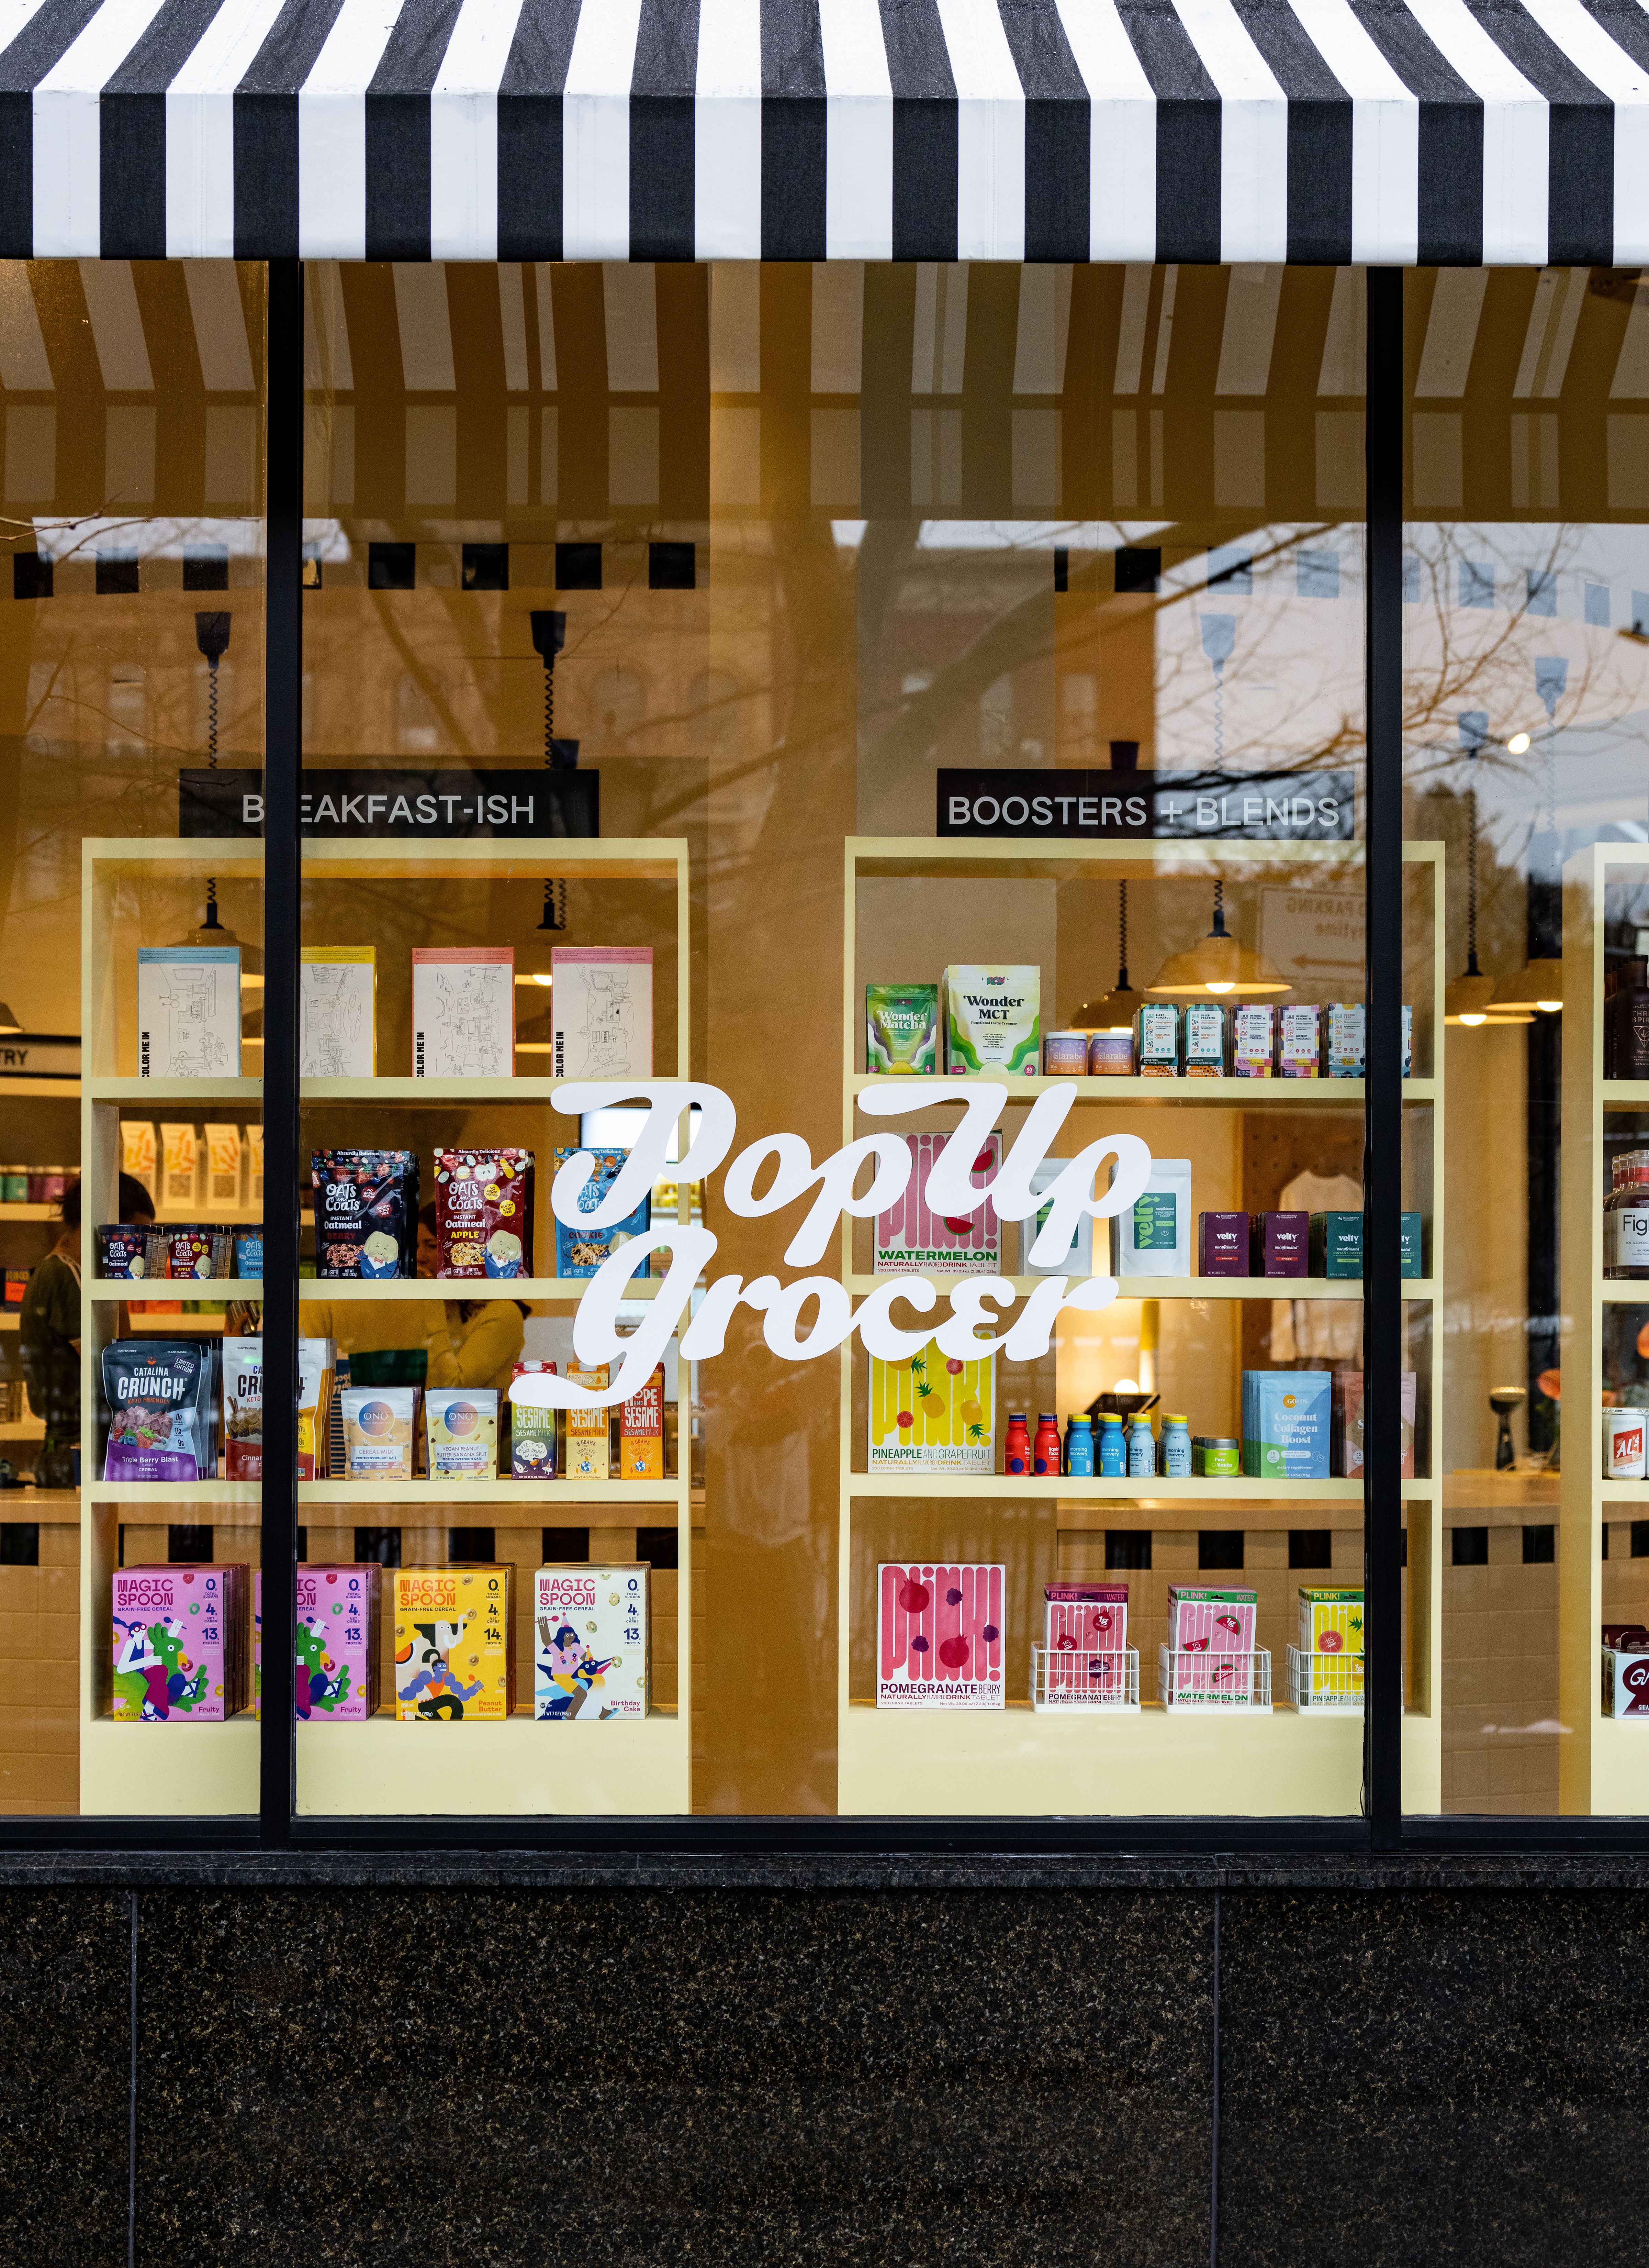 Pop Up Grocer is opening its first permanent grocery store in Manhattan